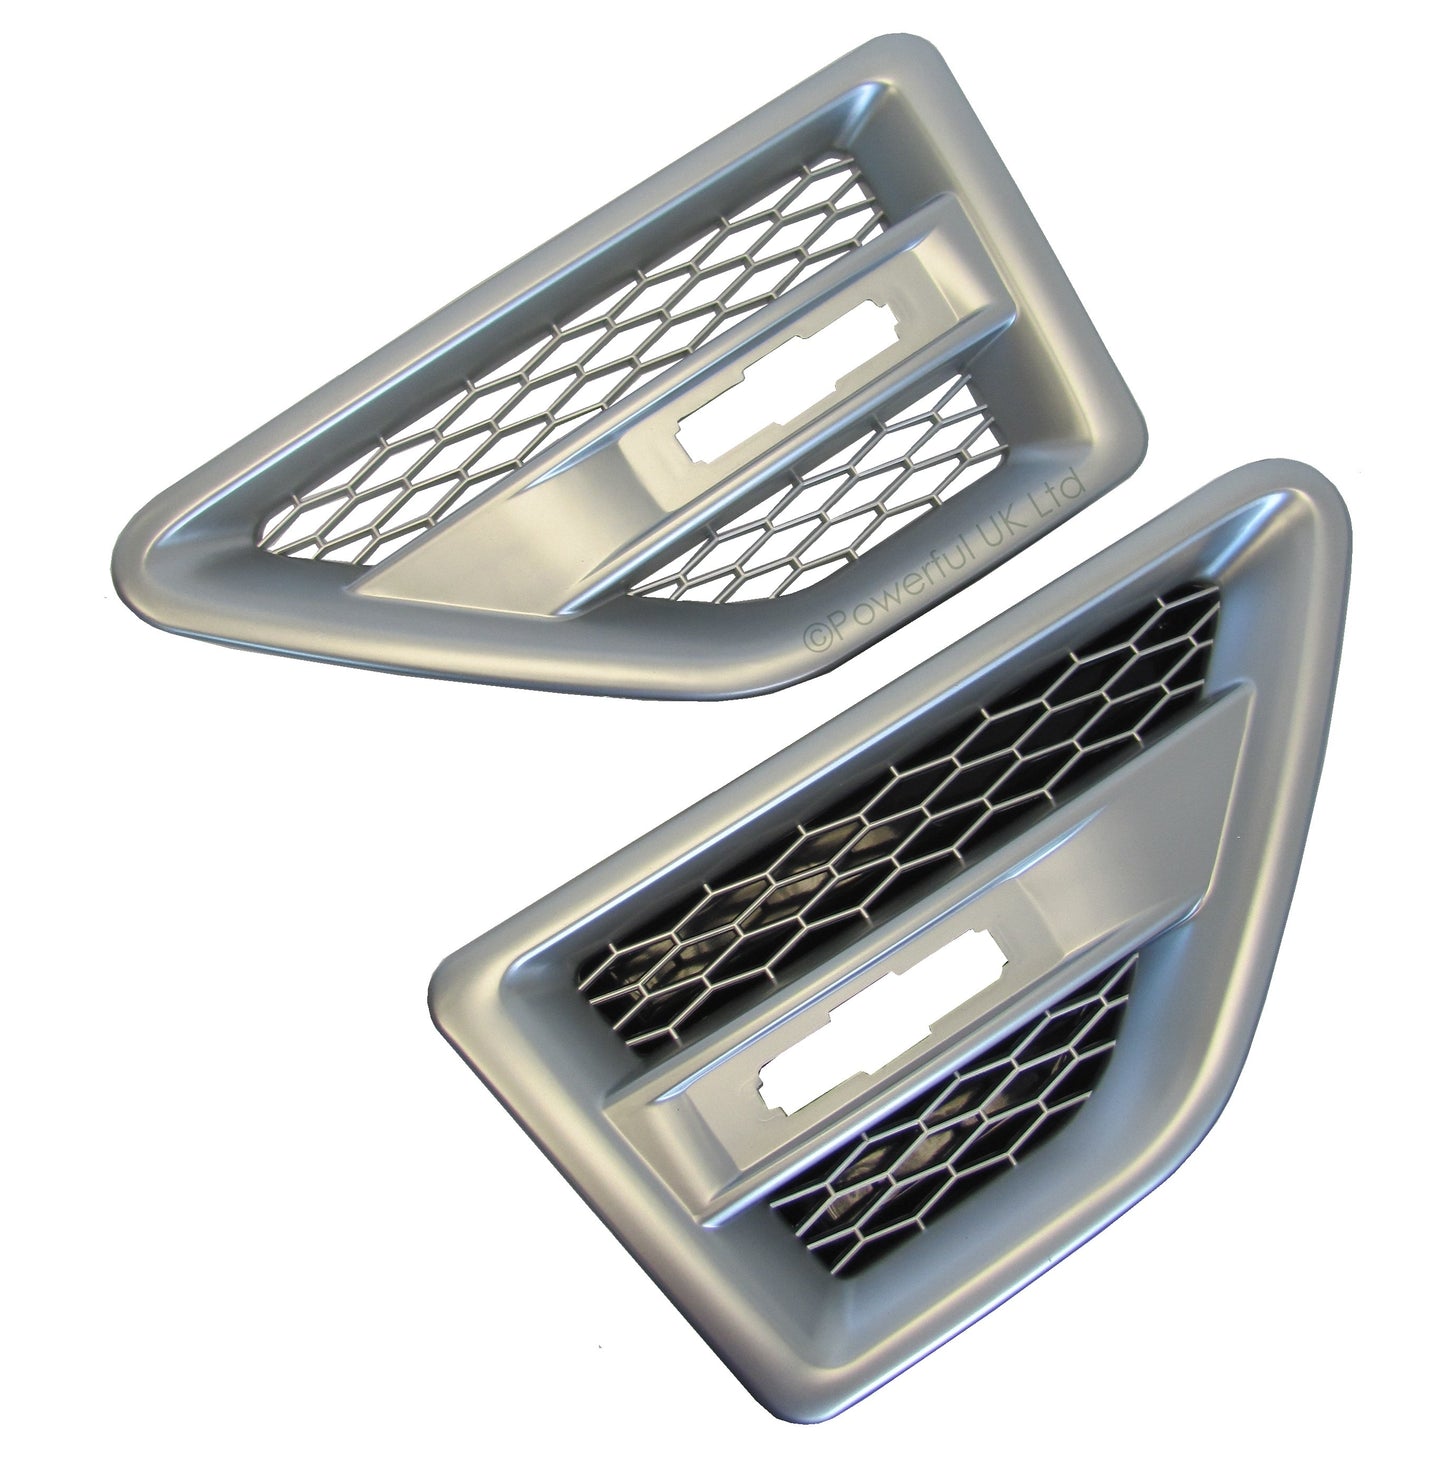 Side Vents - Silver - for Land Rover Freelander 2 - PAIR